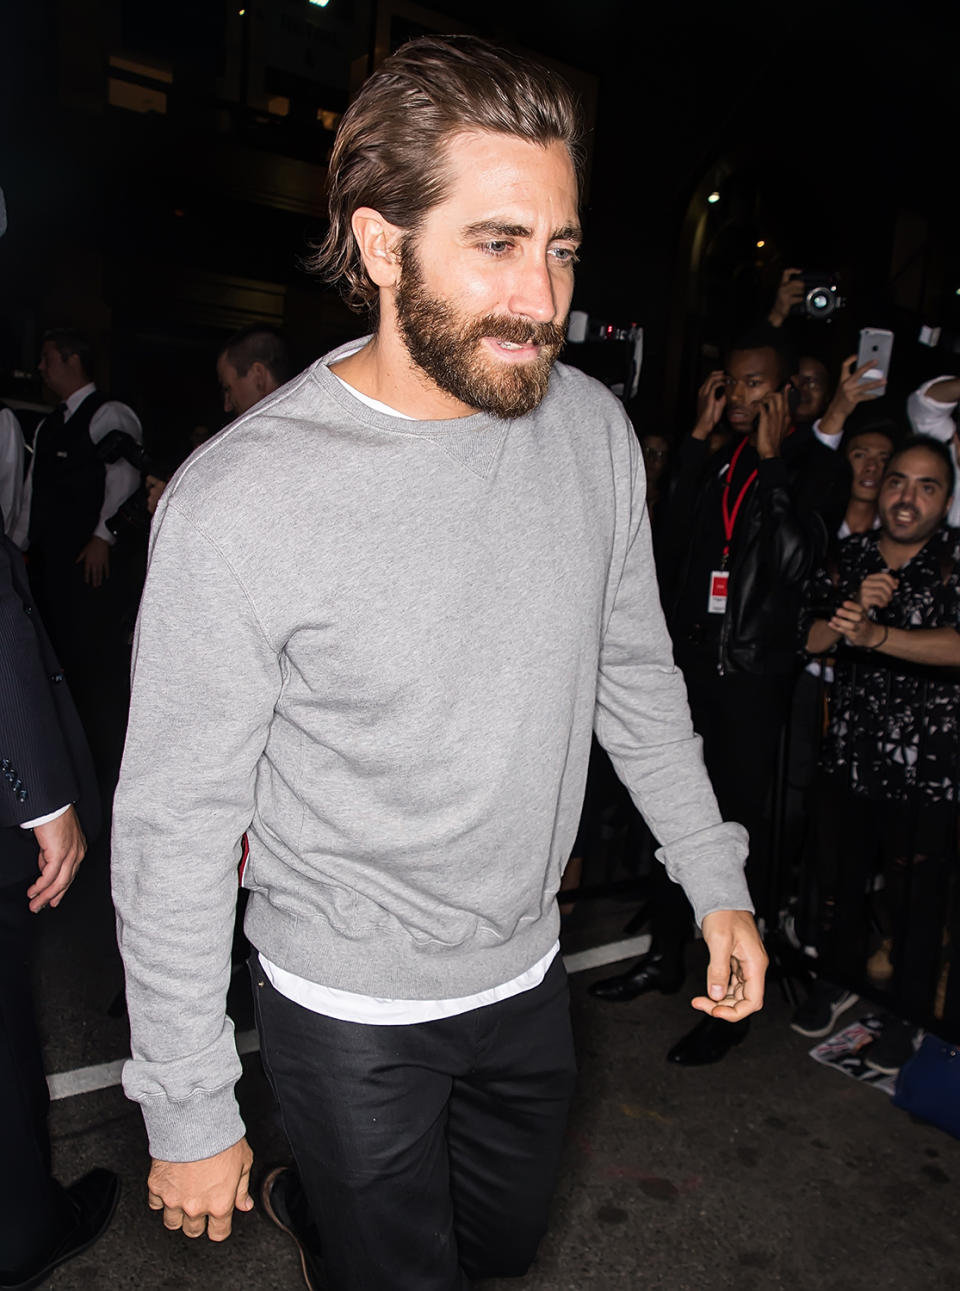 <p>Jake Gyllenhaal arrives at Calvin Klein Collection fashion show during New York Fashion Week on September 7, 2017. (Photo by Gilbert Carrasquillo/GC Images) </p>